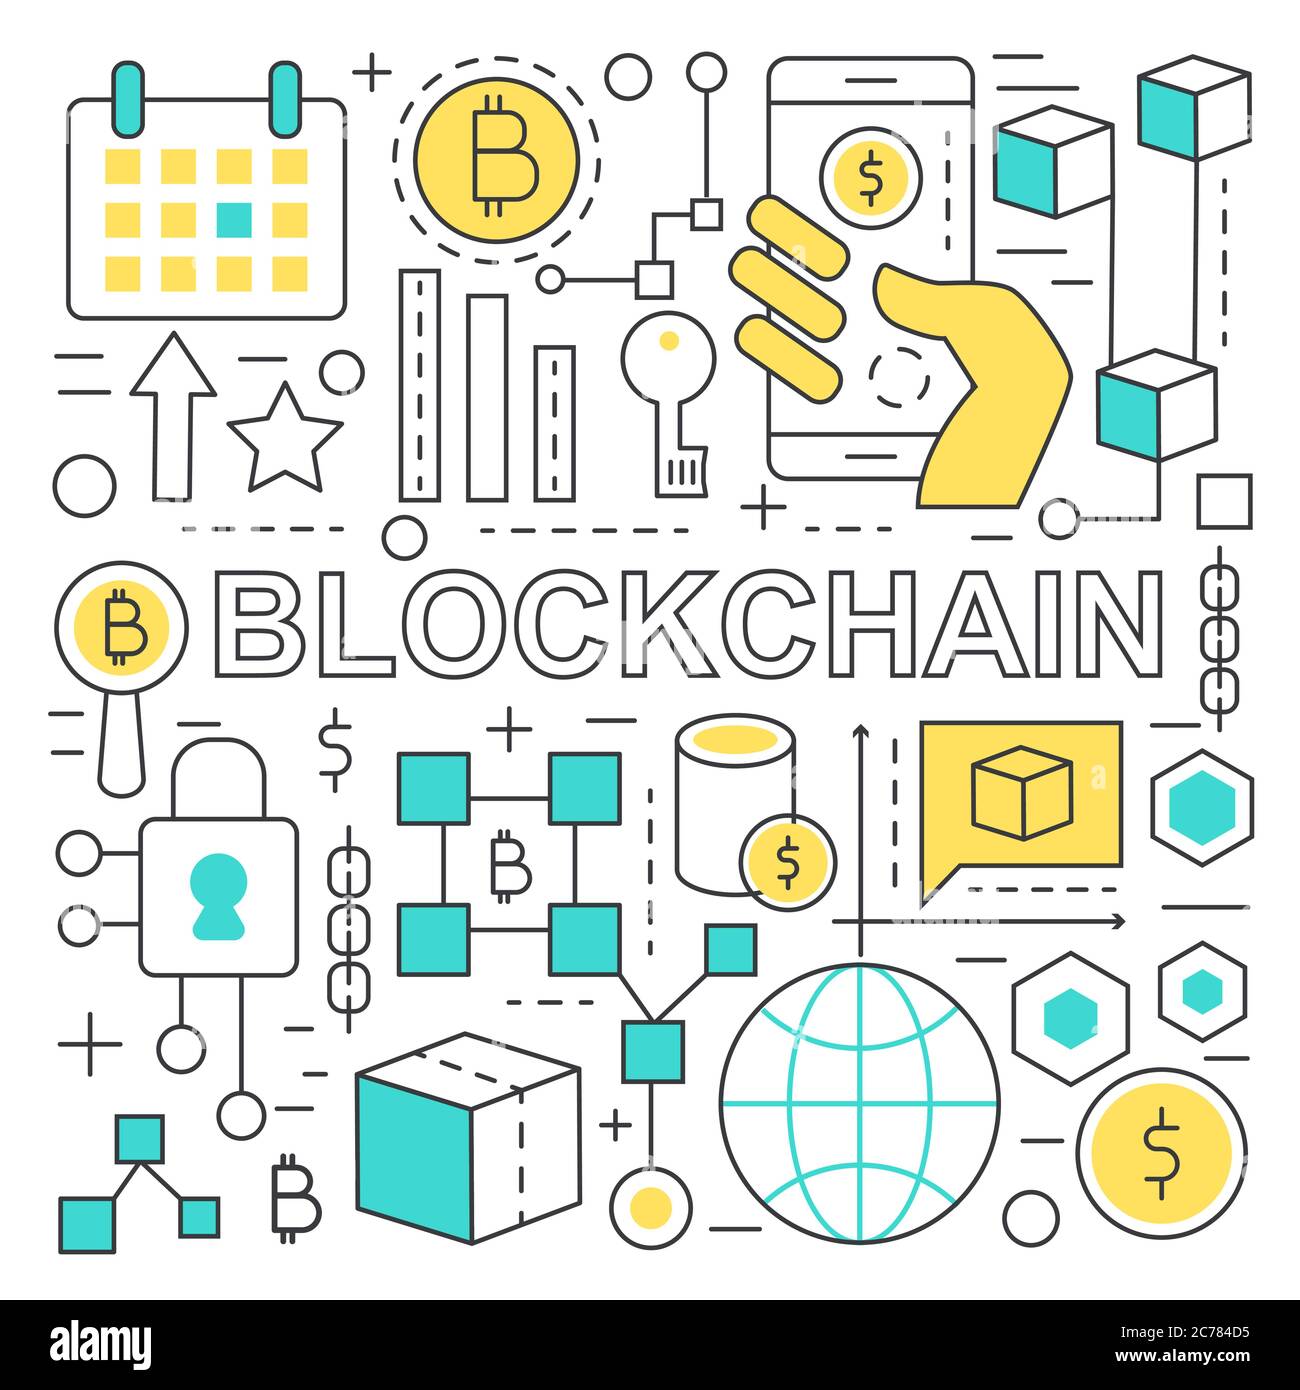 Blockchain text and global network finance concept with blockchain elements Stock Vector